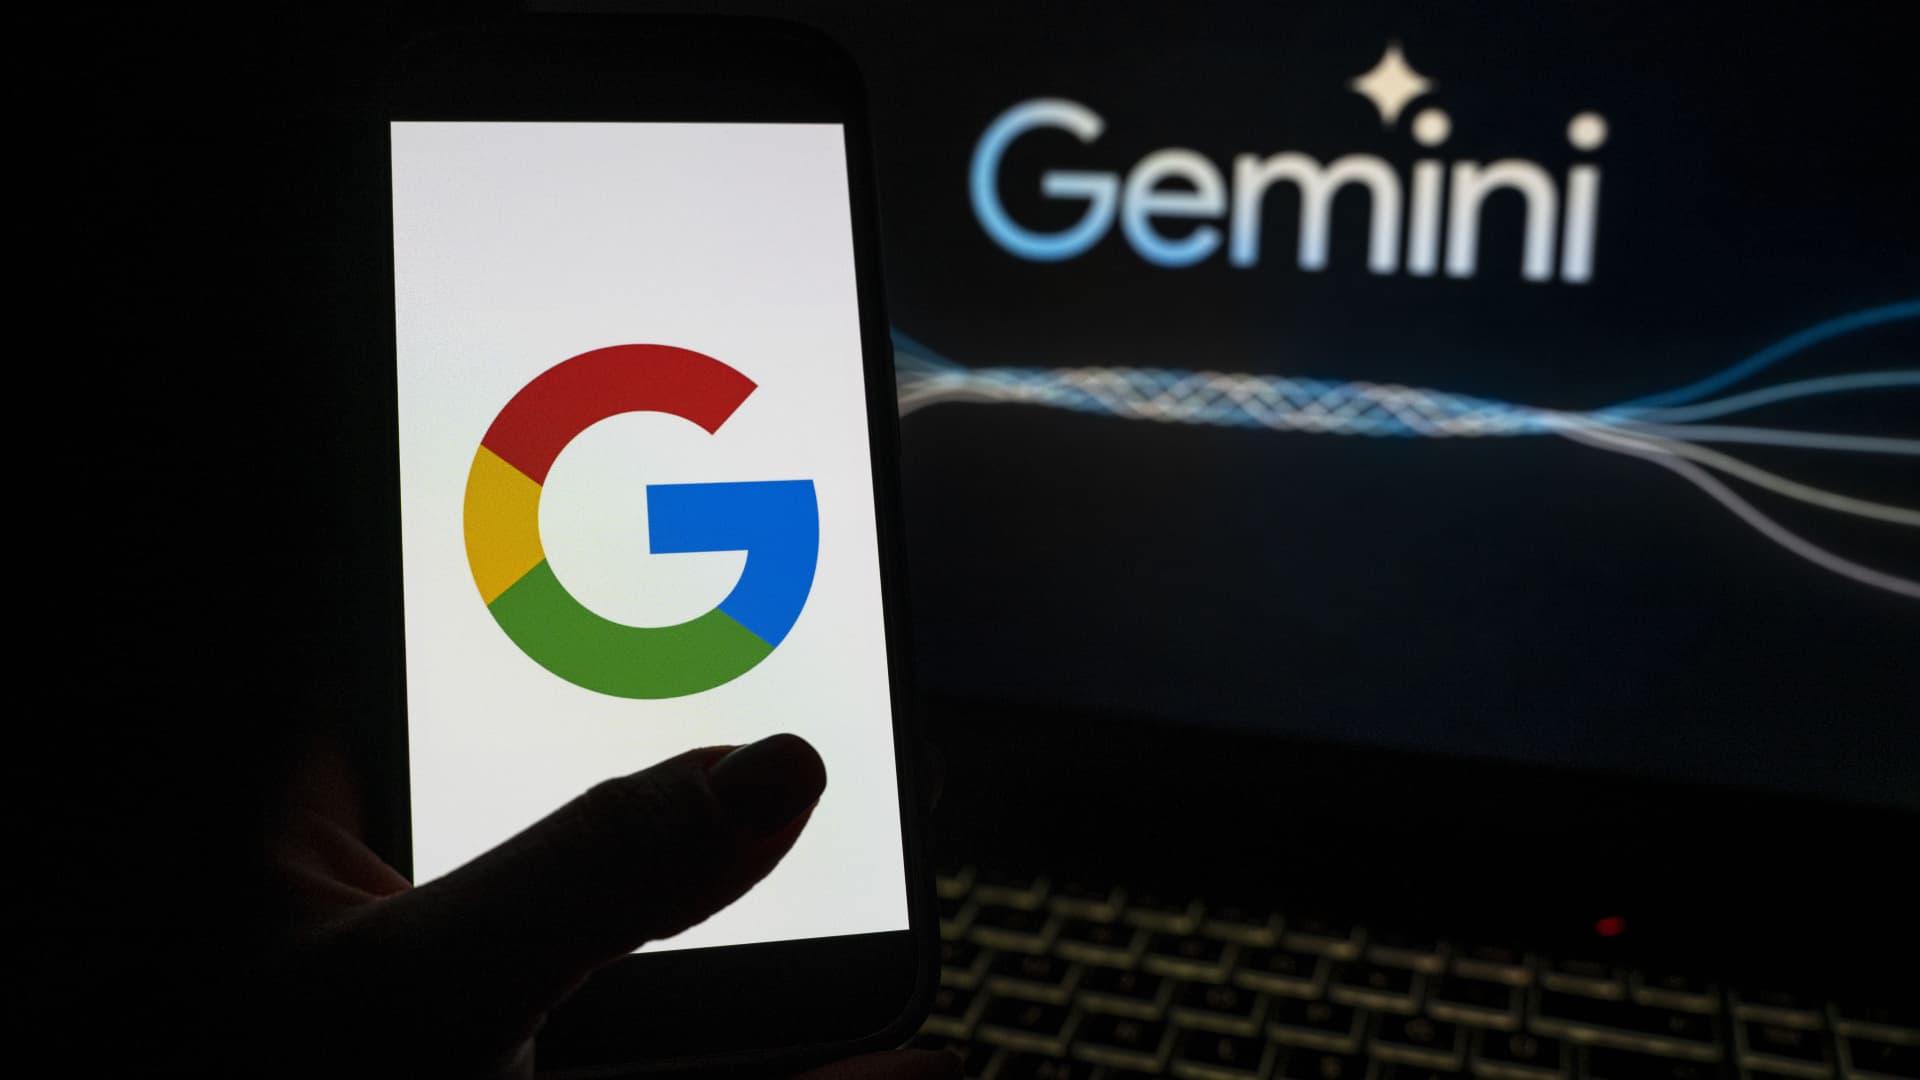 Google pauses Gemini AI image generator after it created inaccurate historical pictures